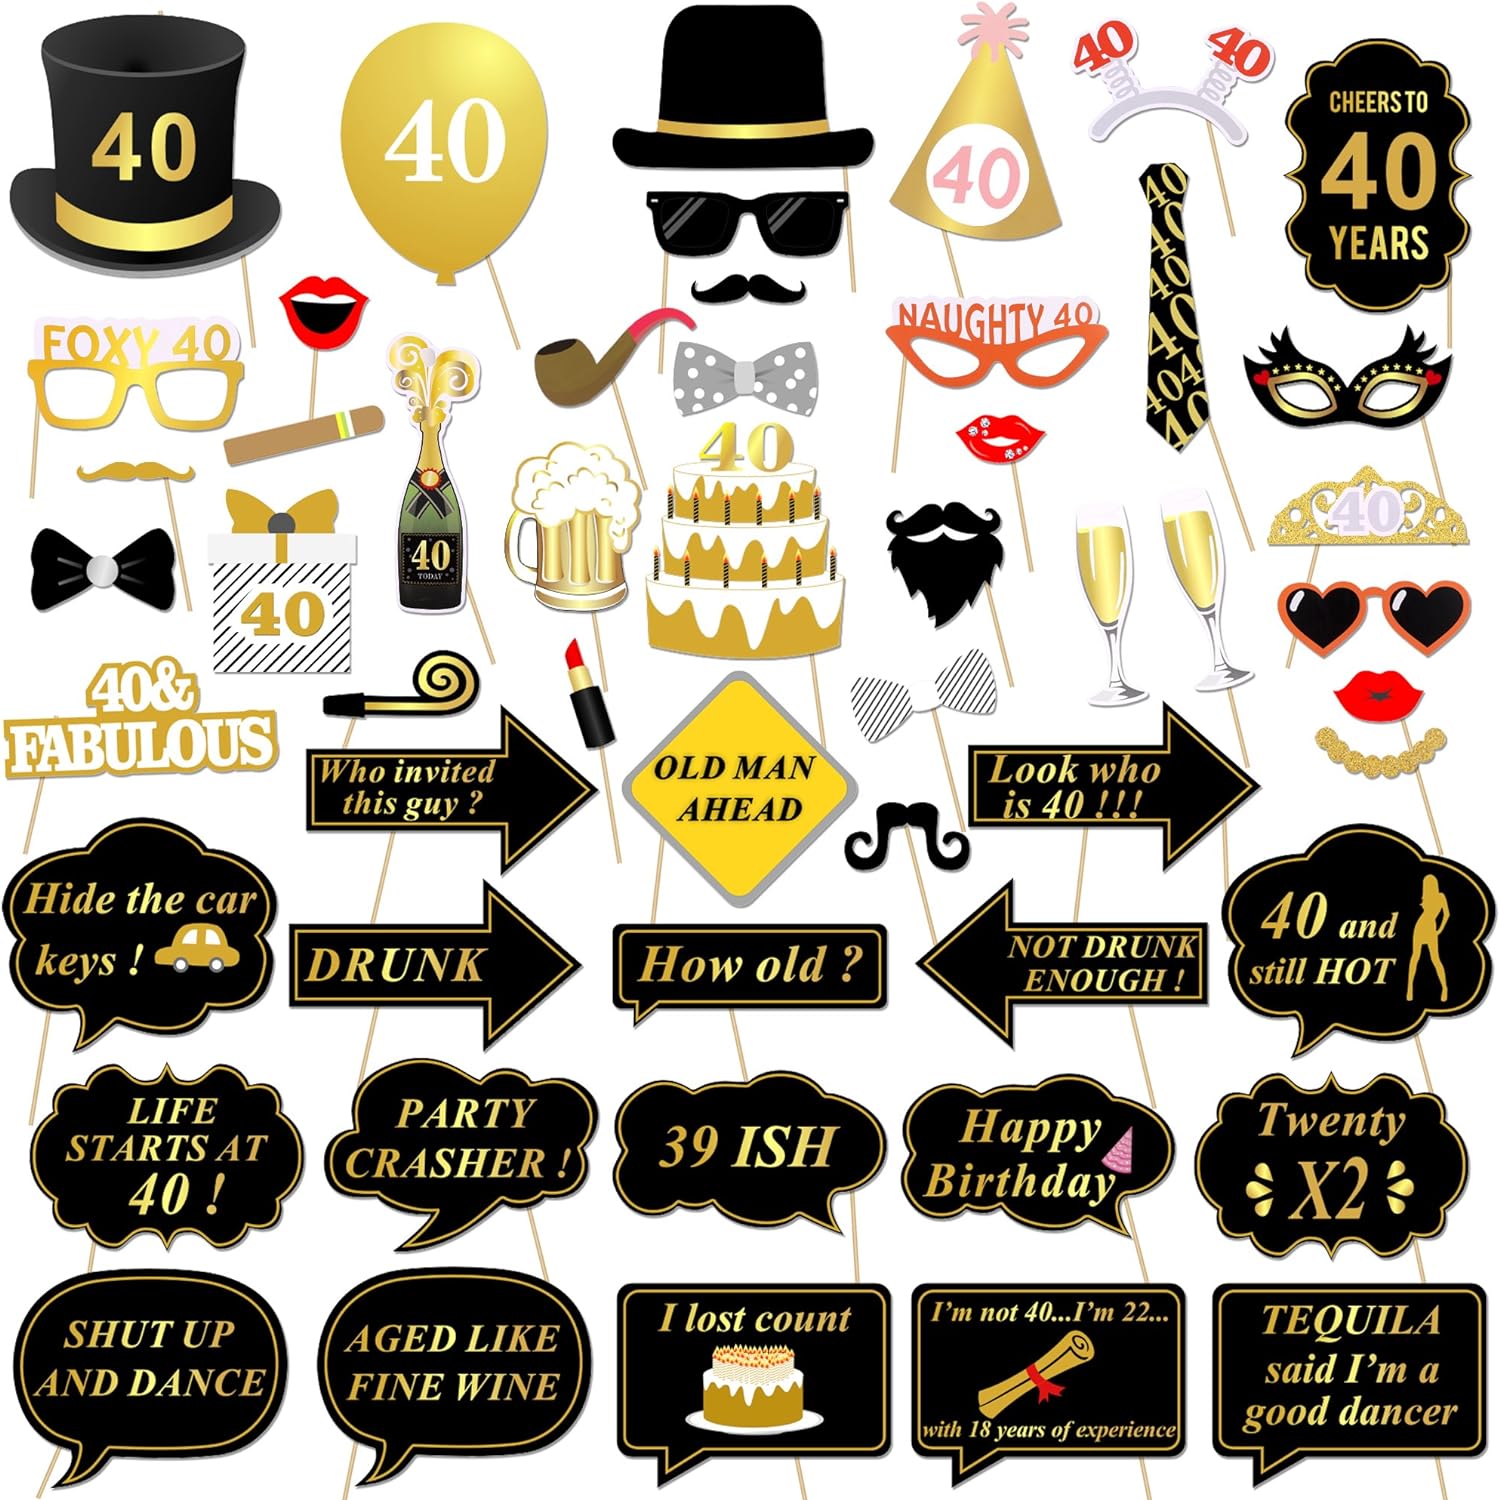 40th Birthday Party Photo Booth Props 53pcs For Her Him Funny 40 Diy Gold And Black Decorations Konsait Supplies Men Women Online In Stan